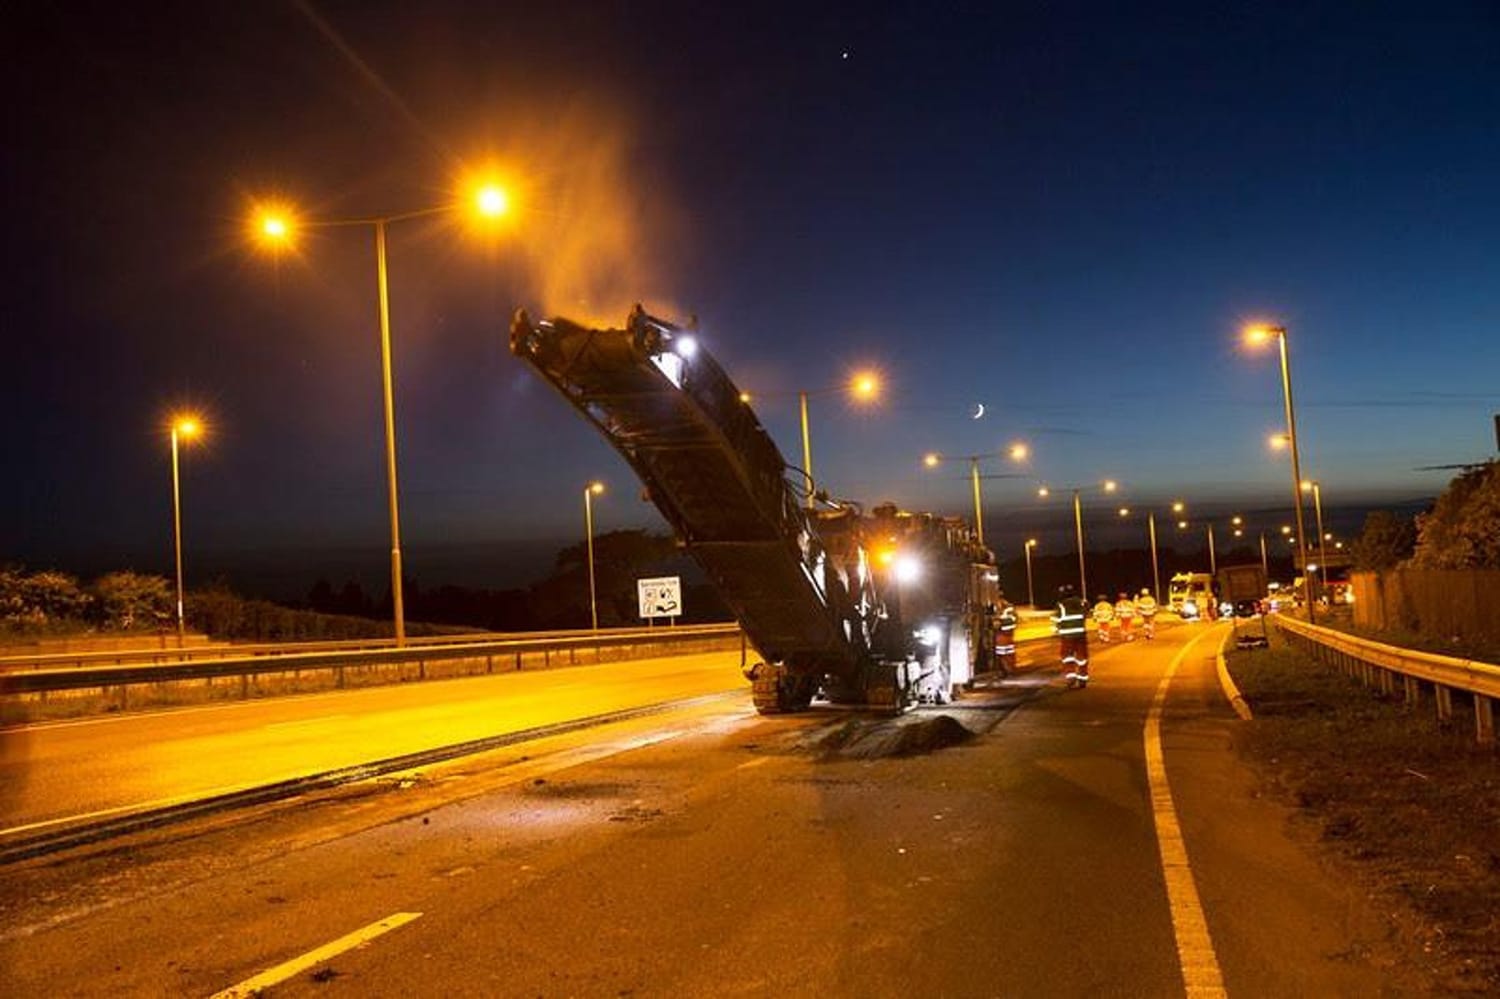 World-first road surfacing trials using graphene to begin on A1 in Northumberland.